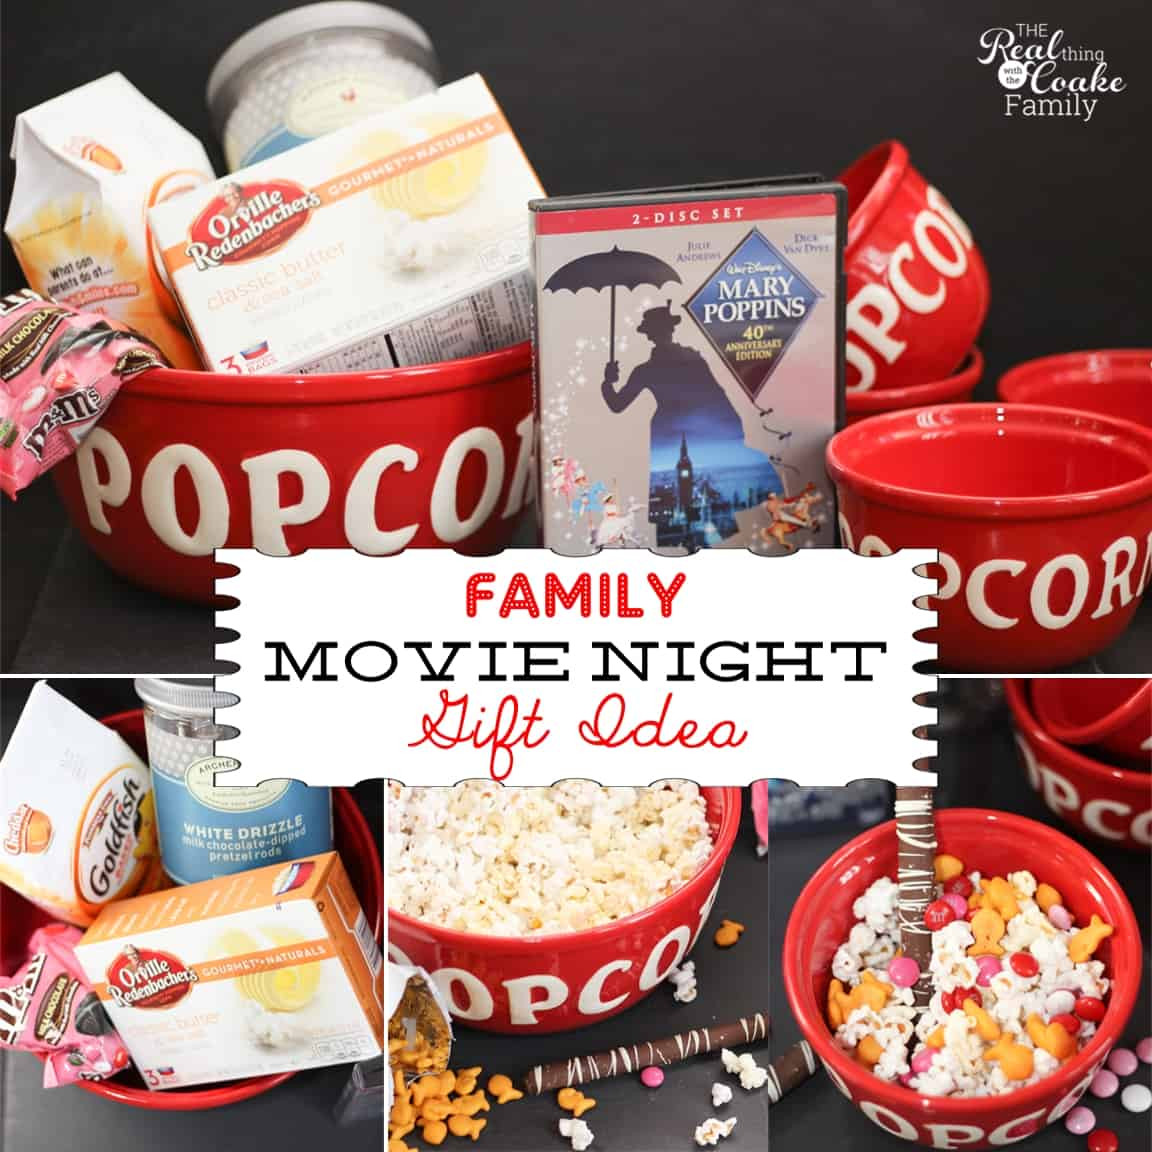 Christmas Gift Ideas For Families
 Family Gift Ideas Movie Night in a box or basket